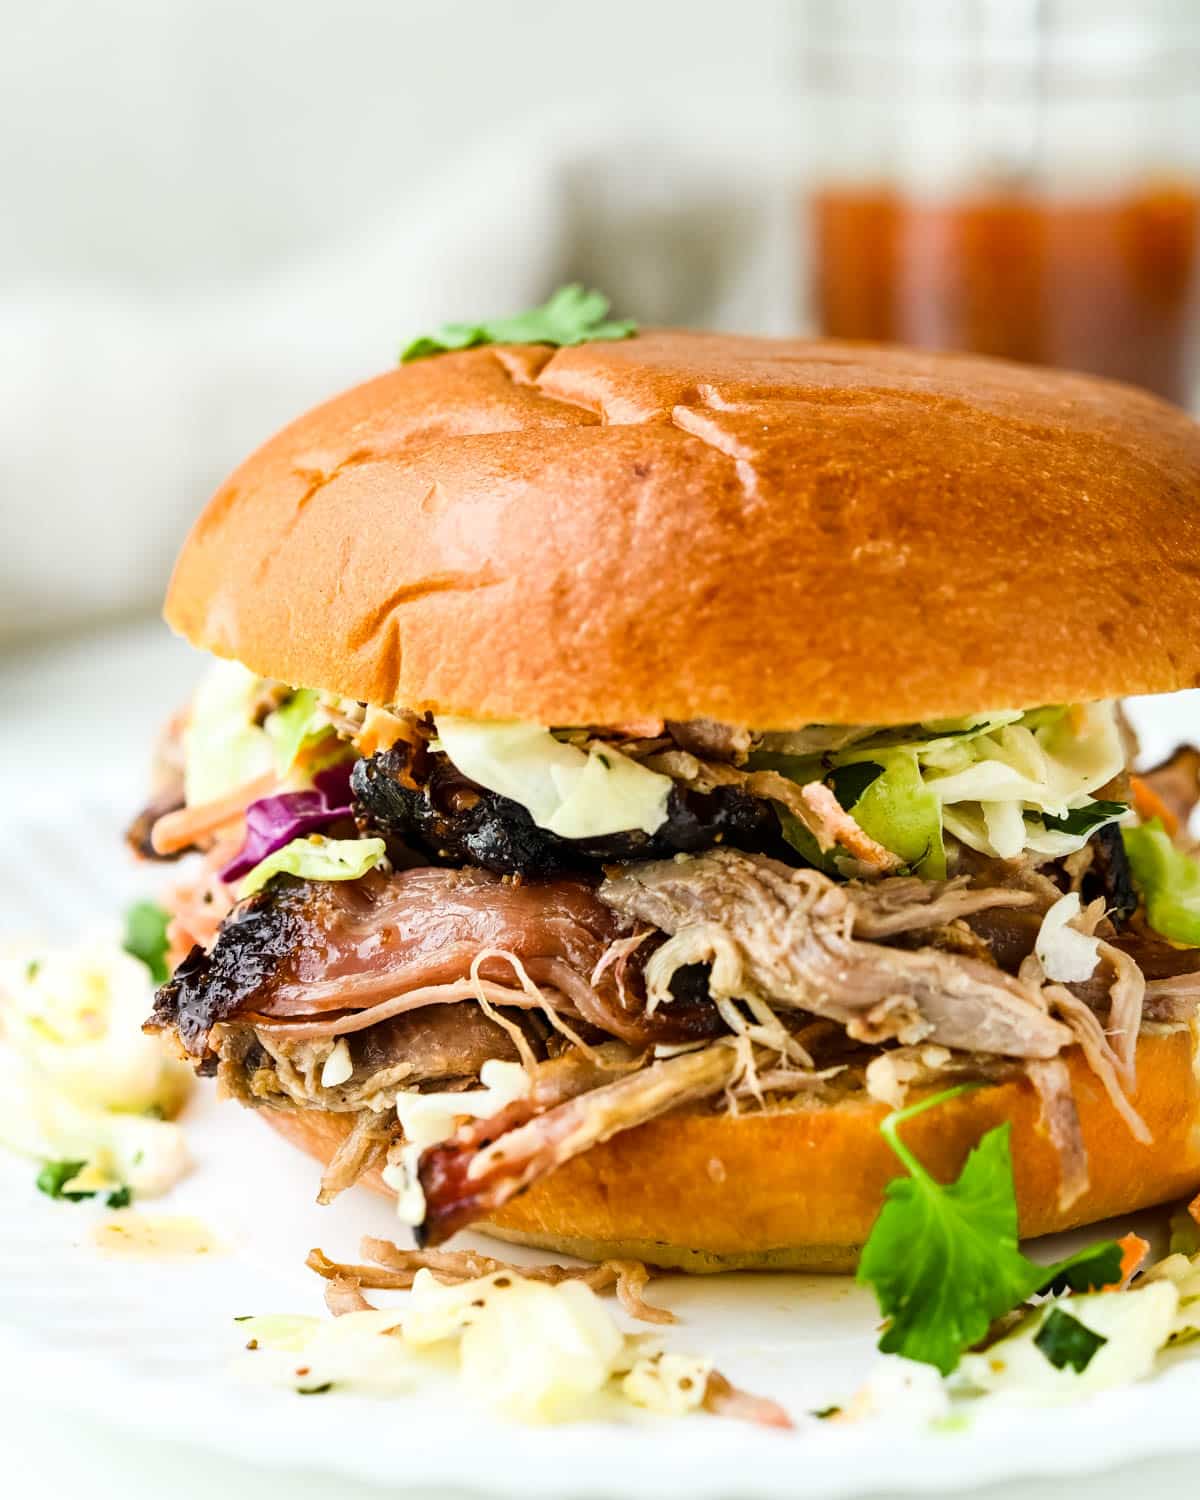 A messy pulled pork sandwich piled with coleslaw.